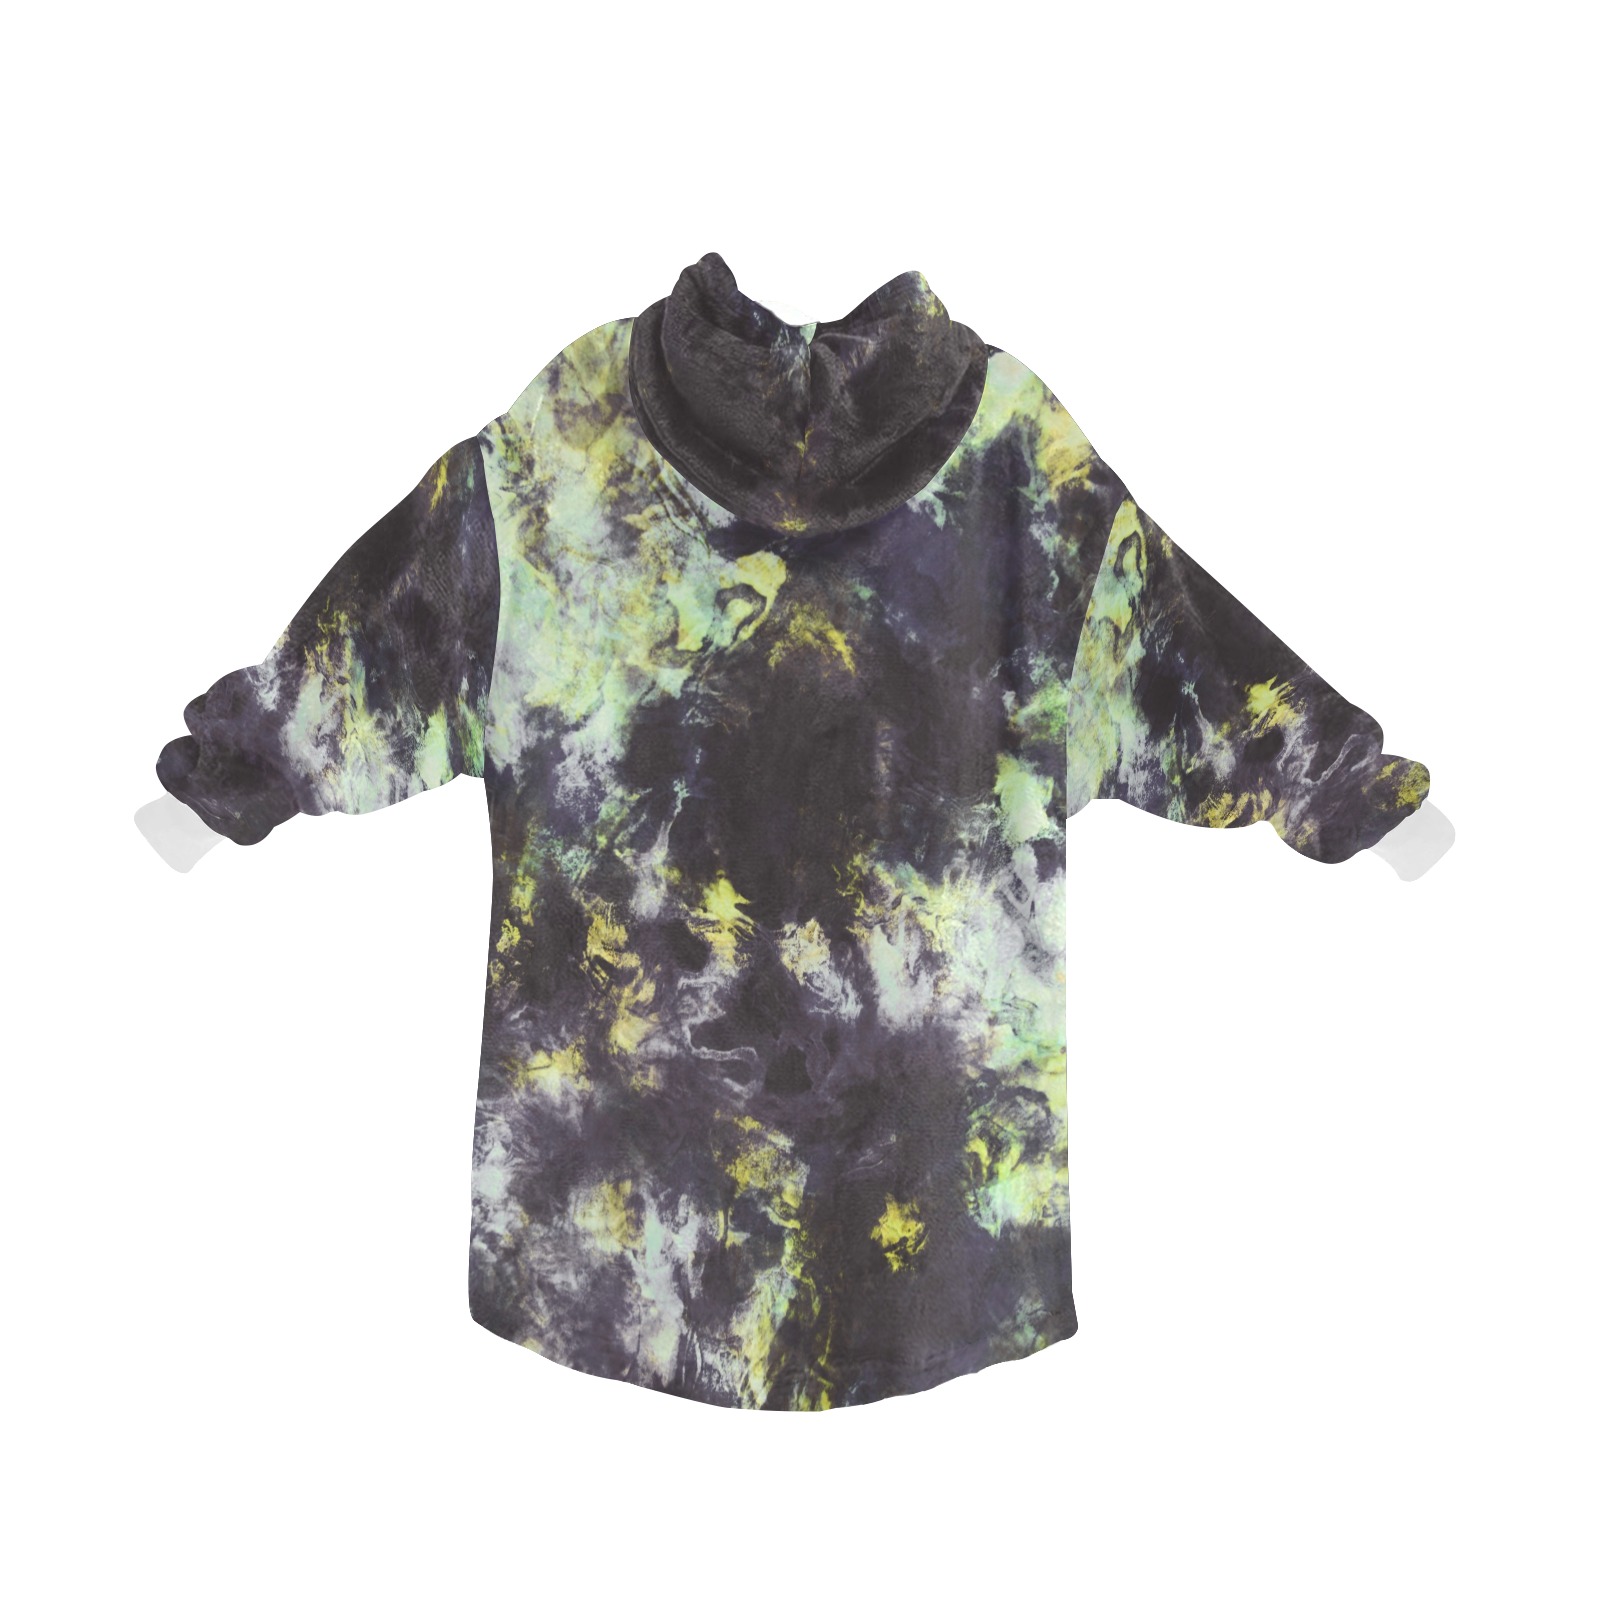 Green and black colorful marbling Blanket Hoodie for Kids